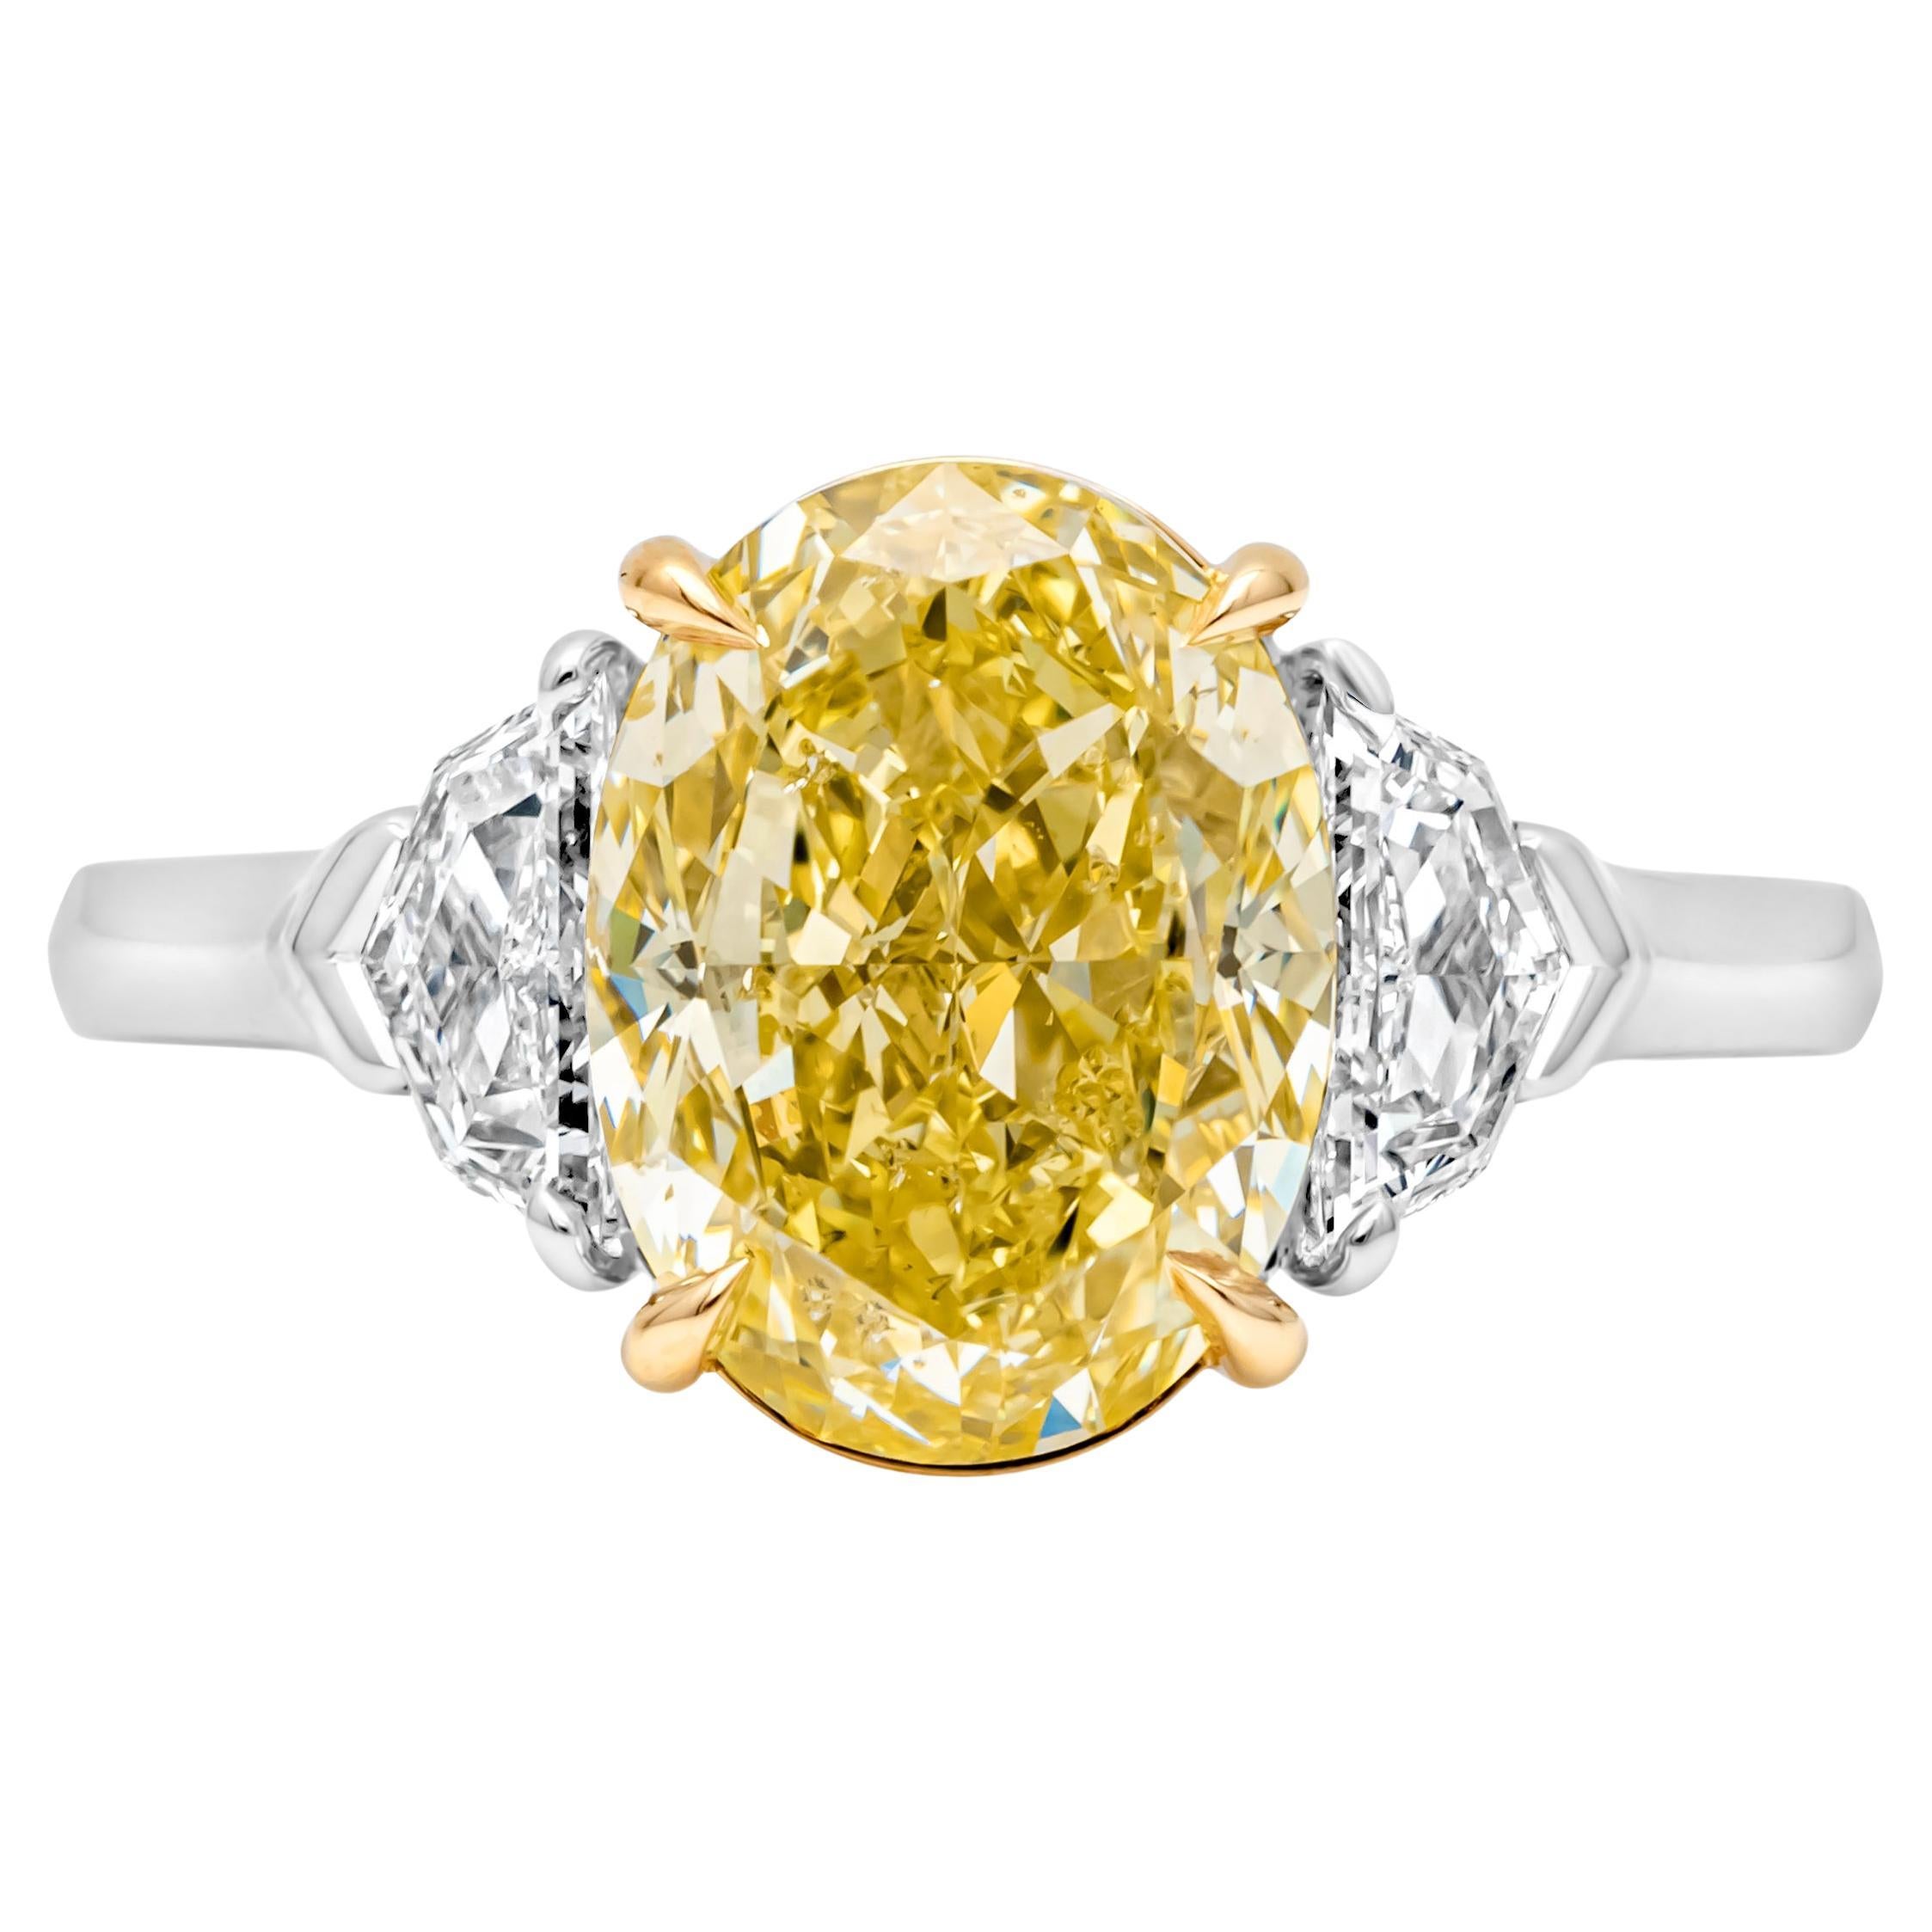 GIA Certified 4.12 Carats Oval Cut Fancy Intense Yellow Diamond Ring For Sale